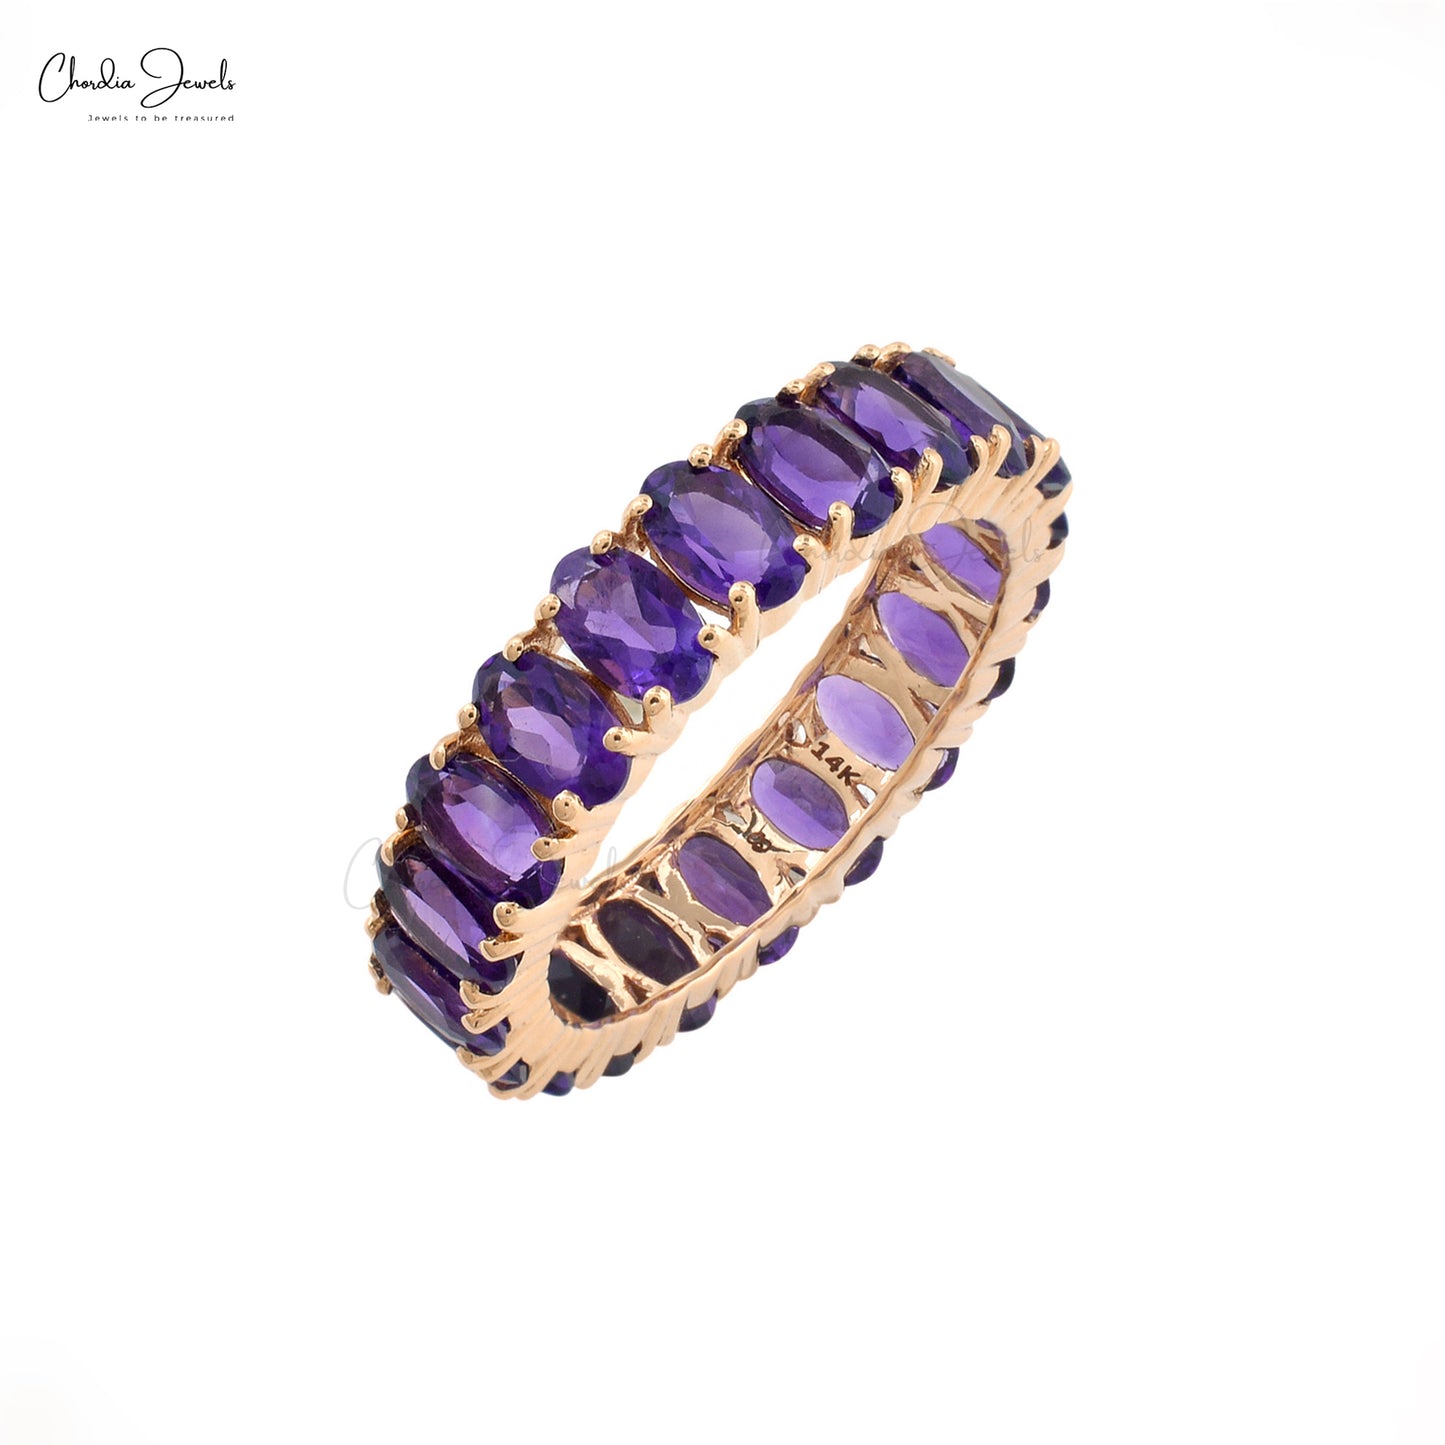 Load image into Gallery viewer, Exquisite 14k Real Rose Gold Eternity Band Genuine Amethyst Gemstone Shared Prong Ring
